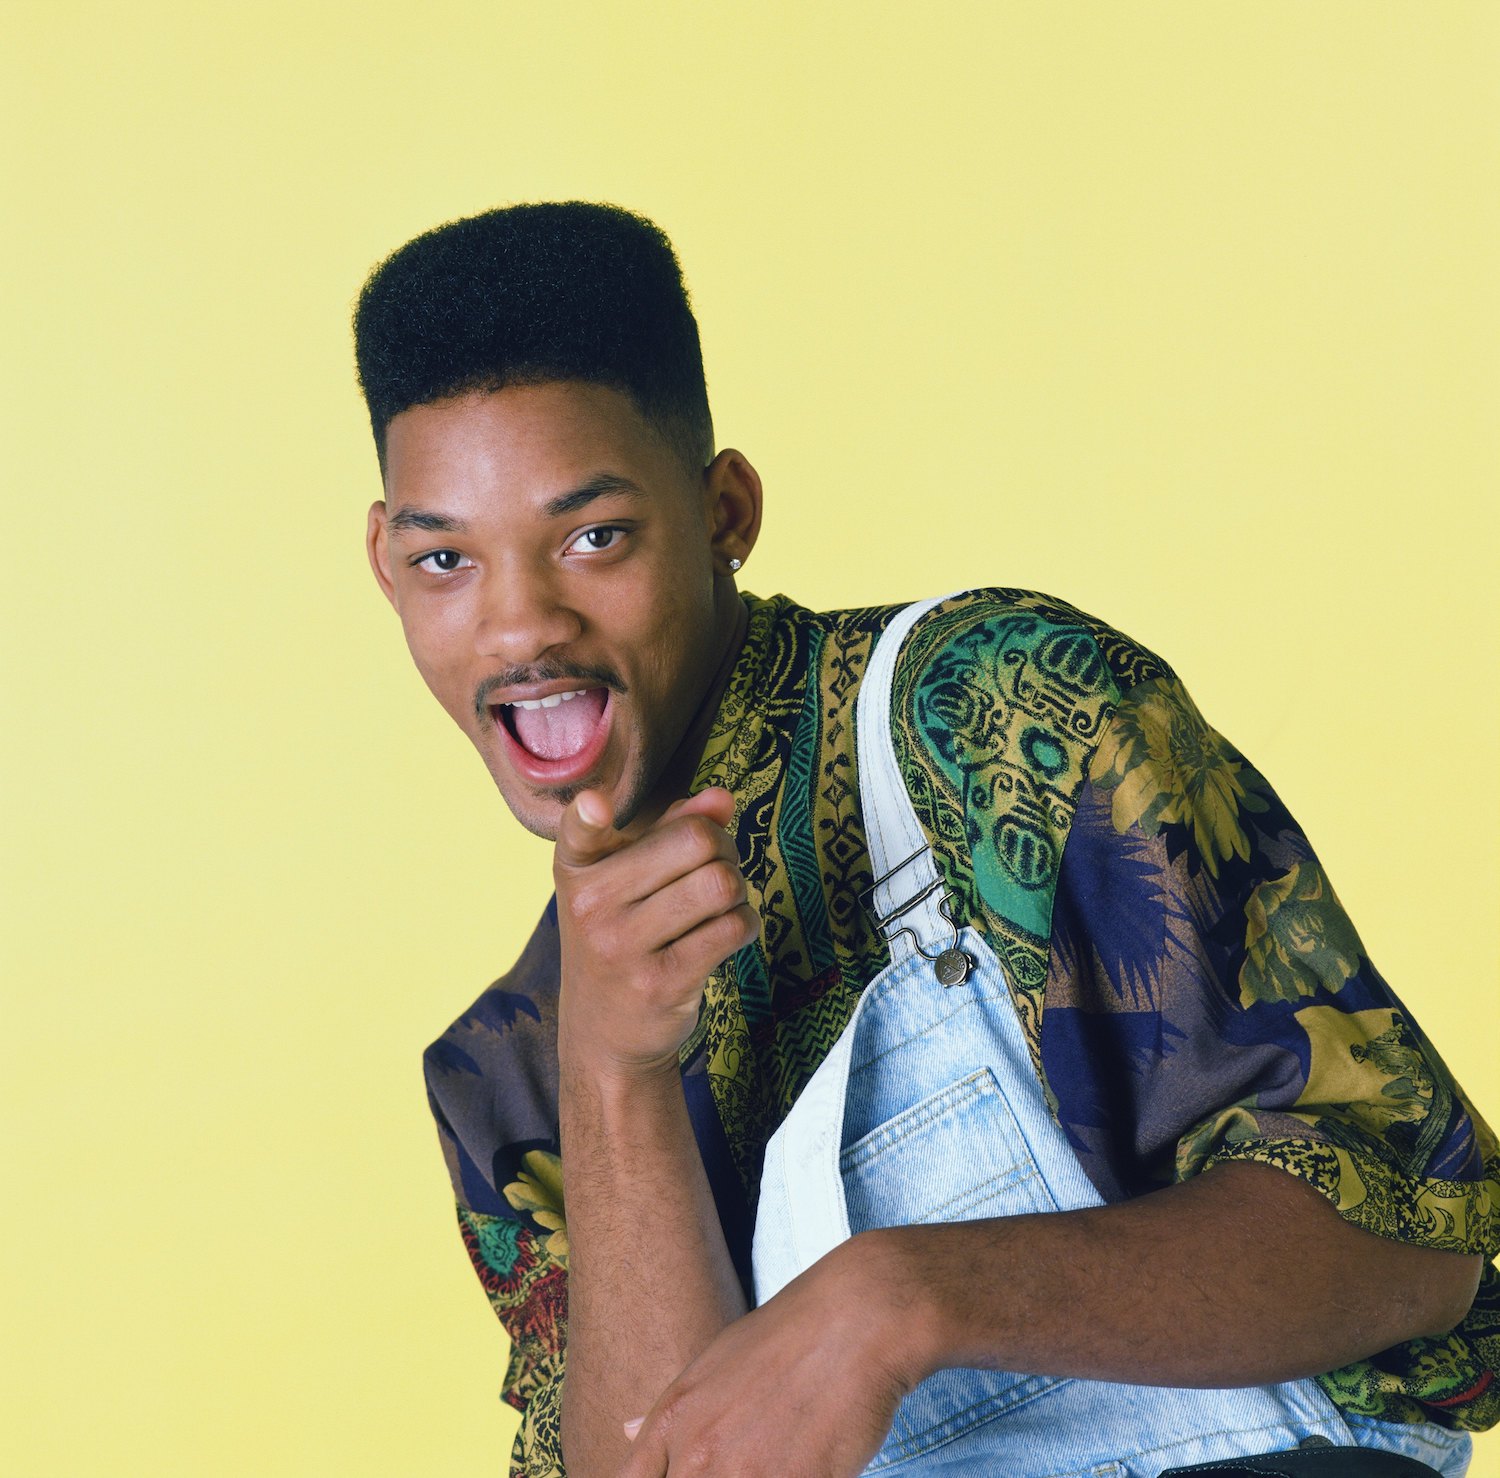 Fresh Prince of San Jose: Will Smith is more than meets the eye